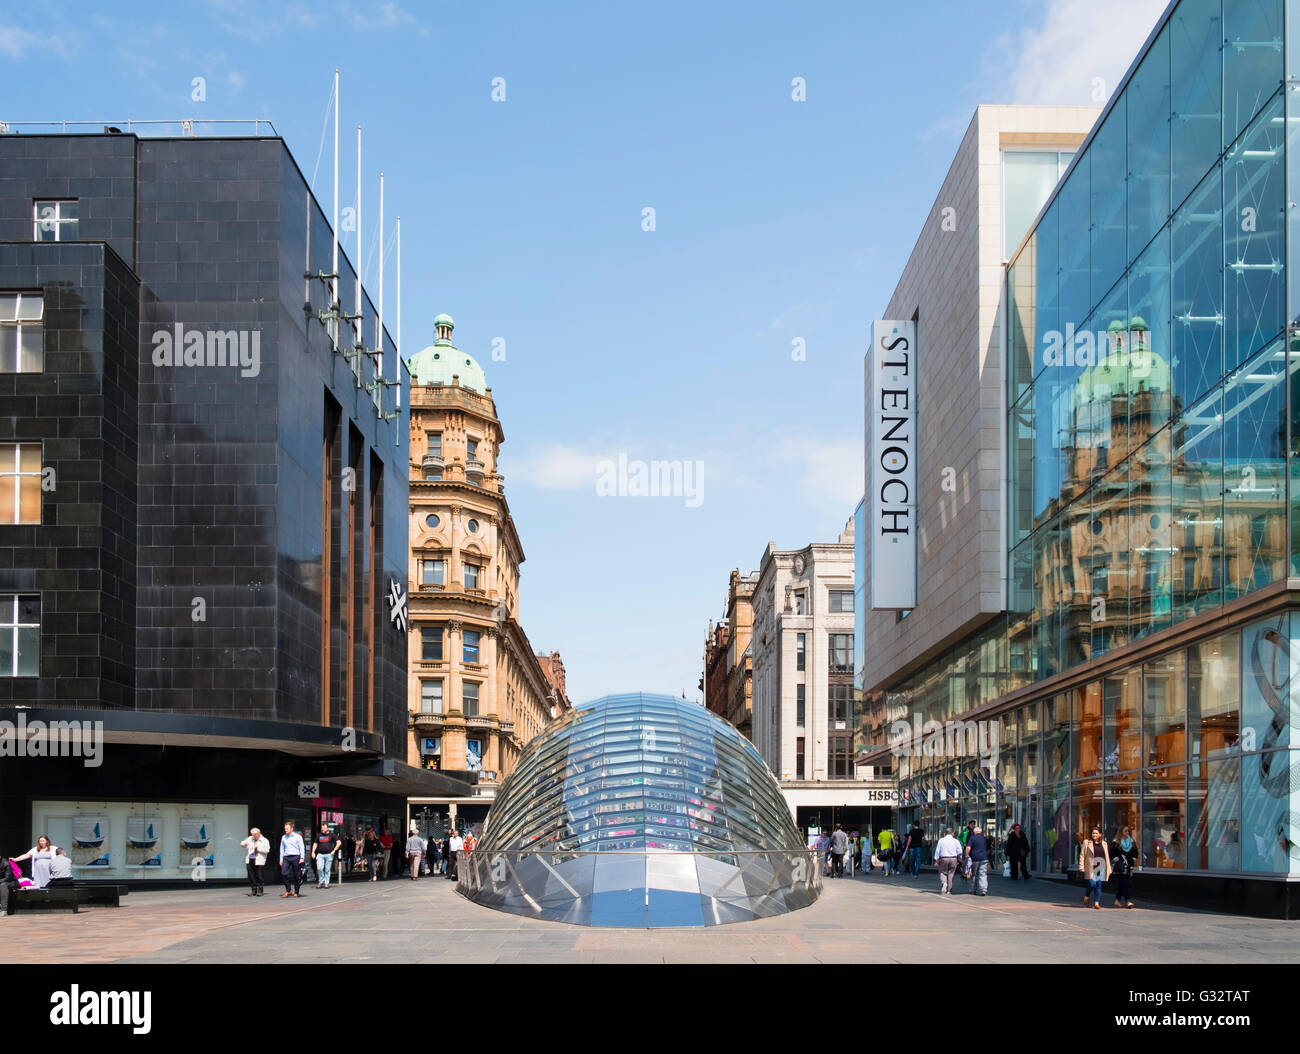 view of entrance to St Enoch station on Glasgow Underground at St Enoch Square in Glasgow, Scotland, United Kingdom Stock Photo